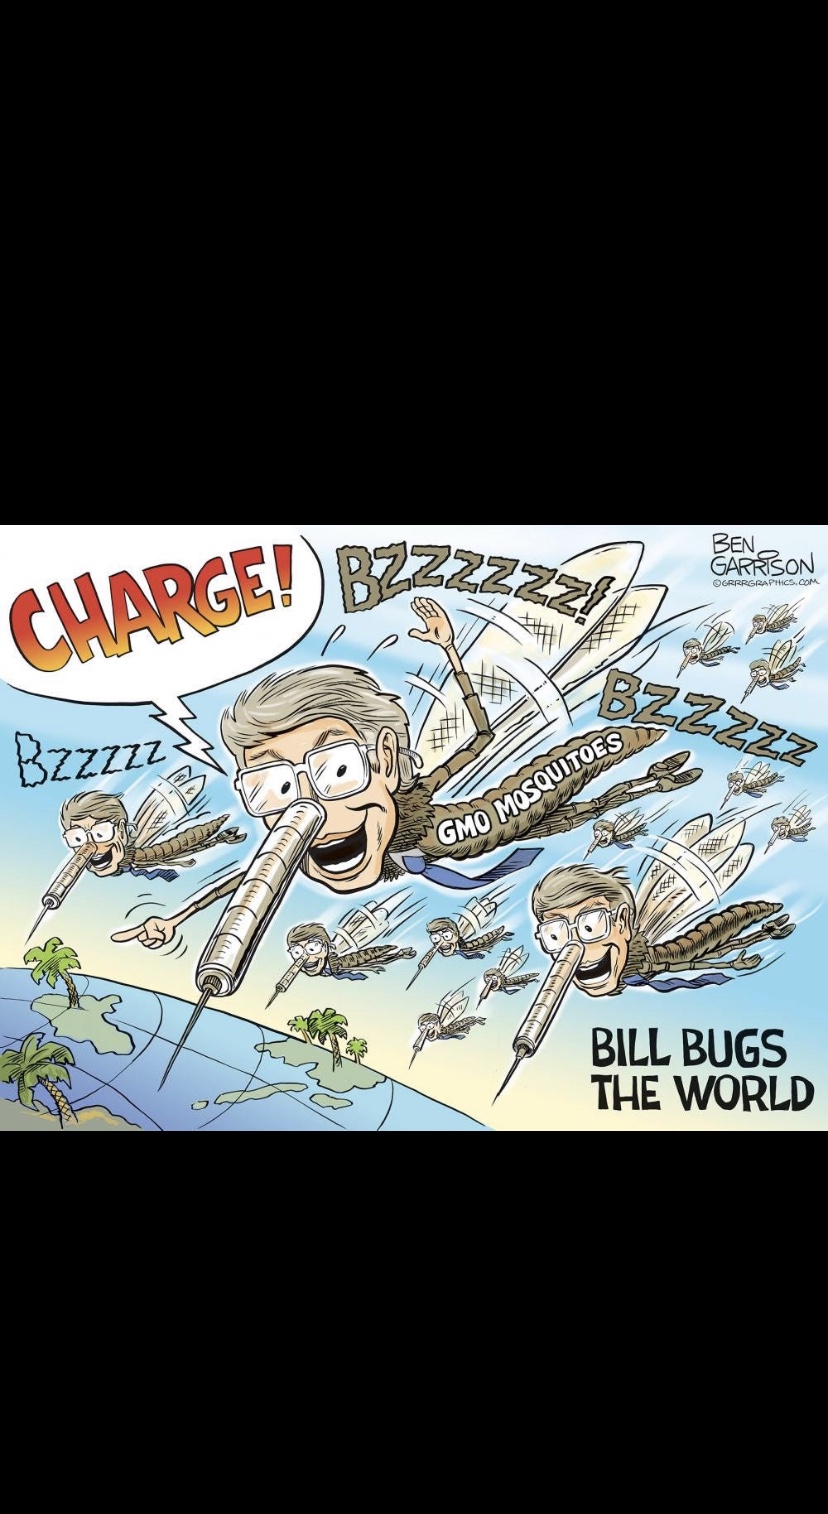 Oxitec Mosquitos and the Bill Gates-Epstein-Harvard connection